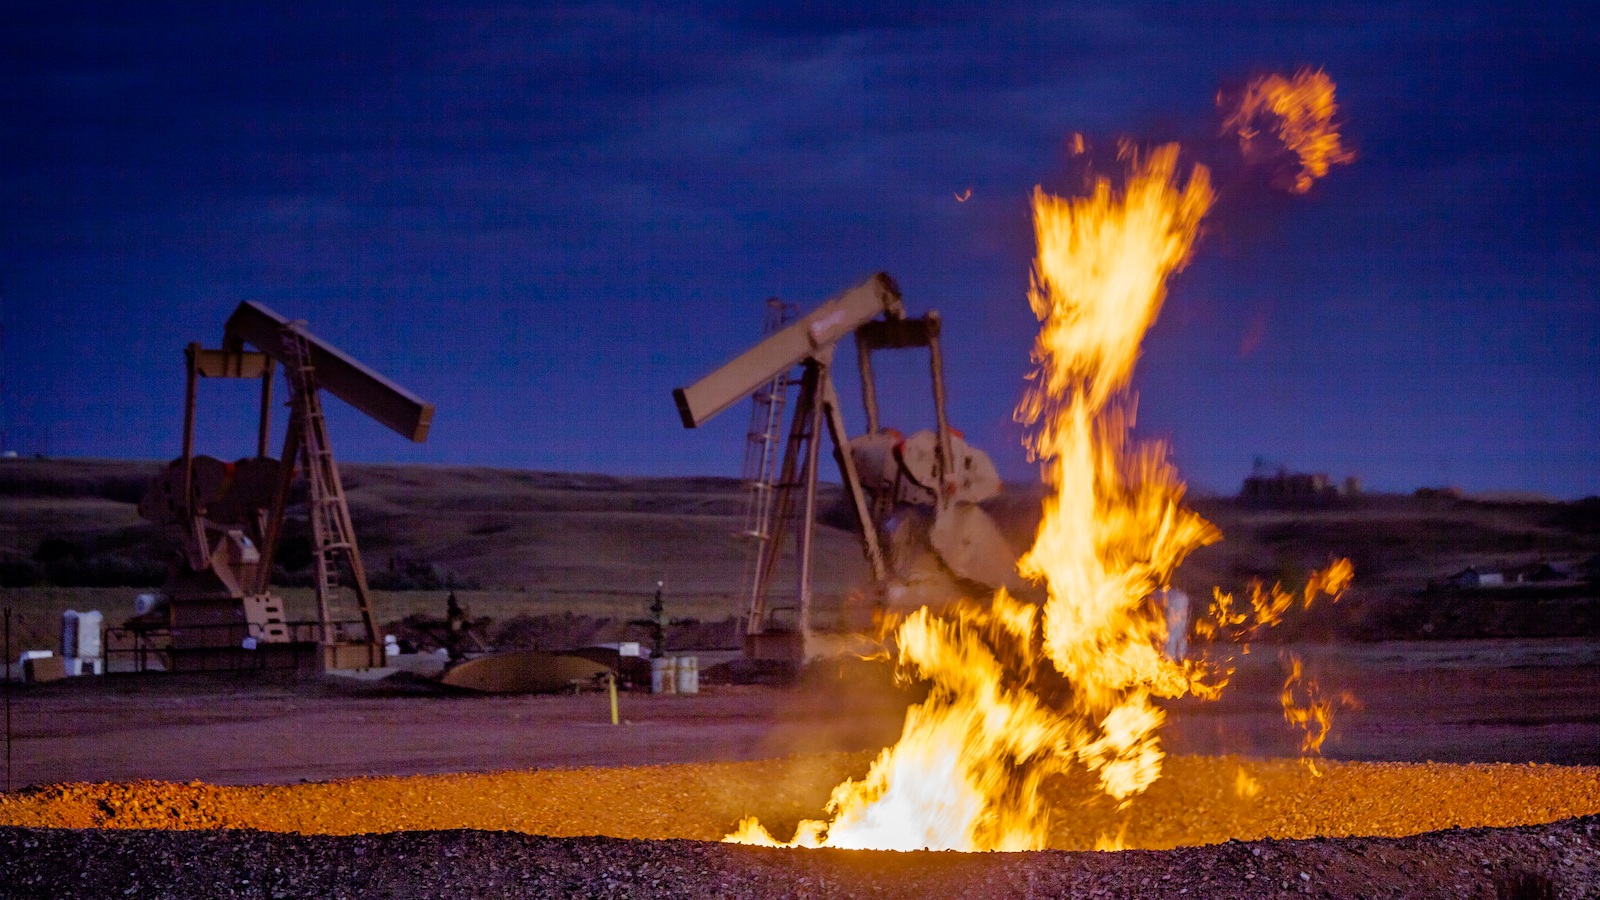 Flames emerge from a pit, with pumpjacks and a dark sky in the background.